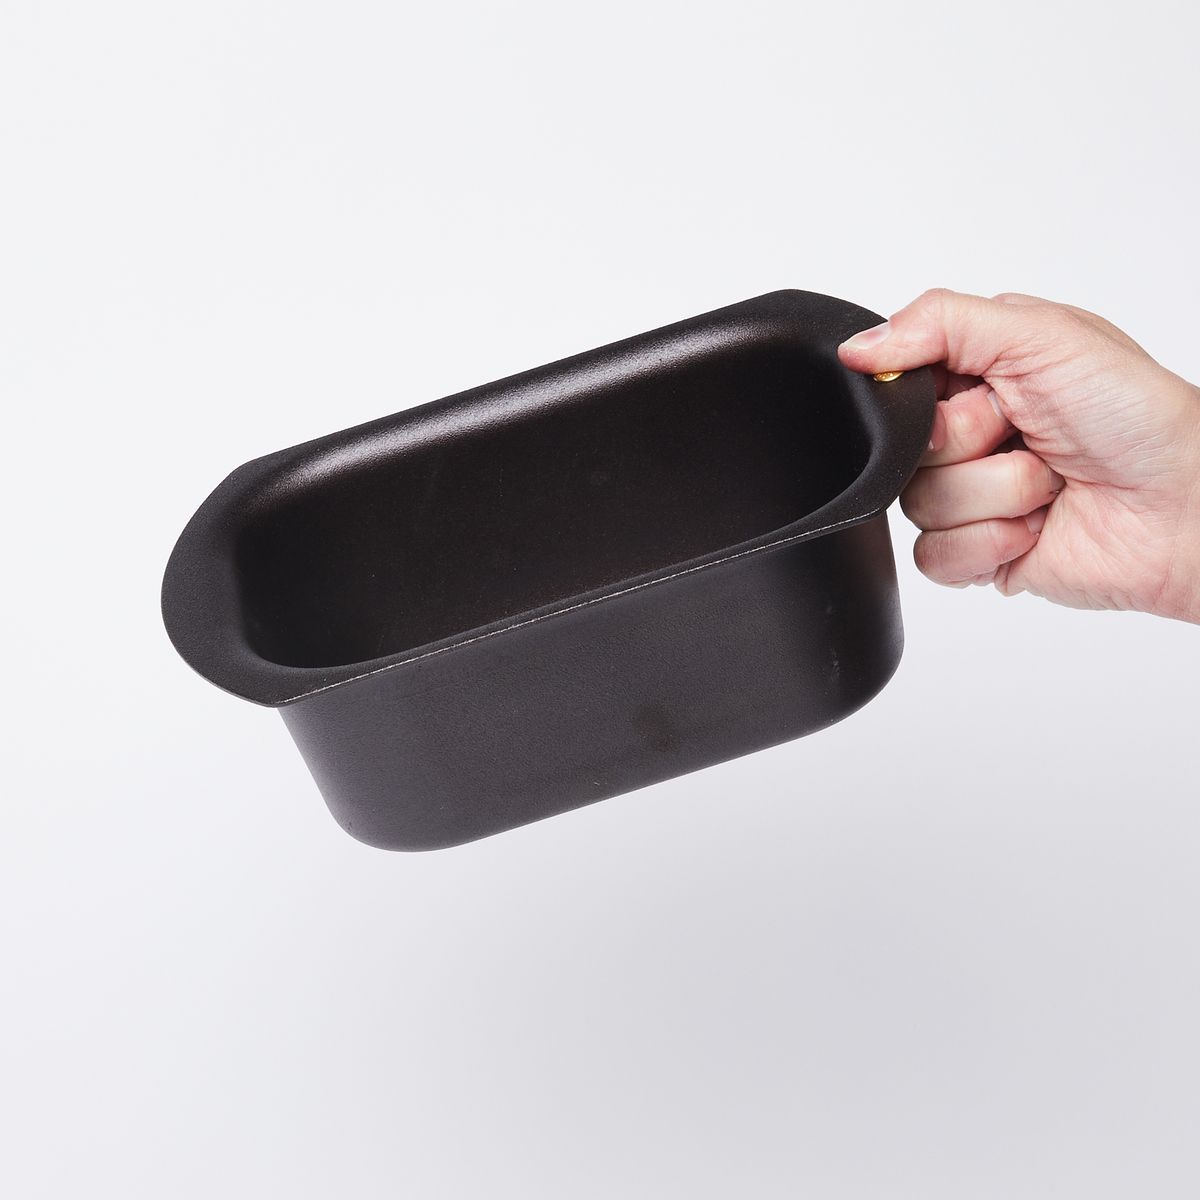 Hand holding a black metal loaf pan with rounded corners from the wide flat lip